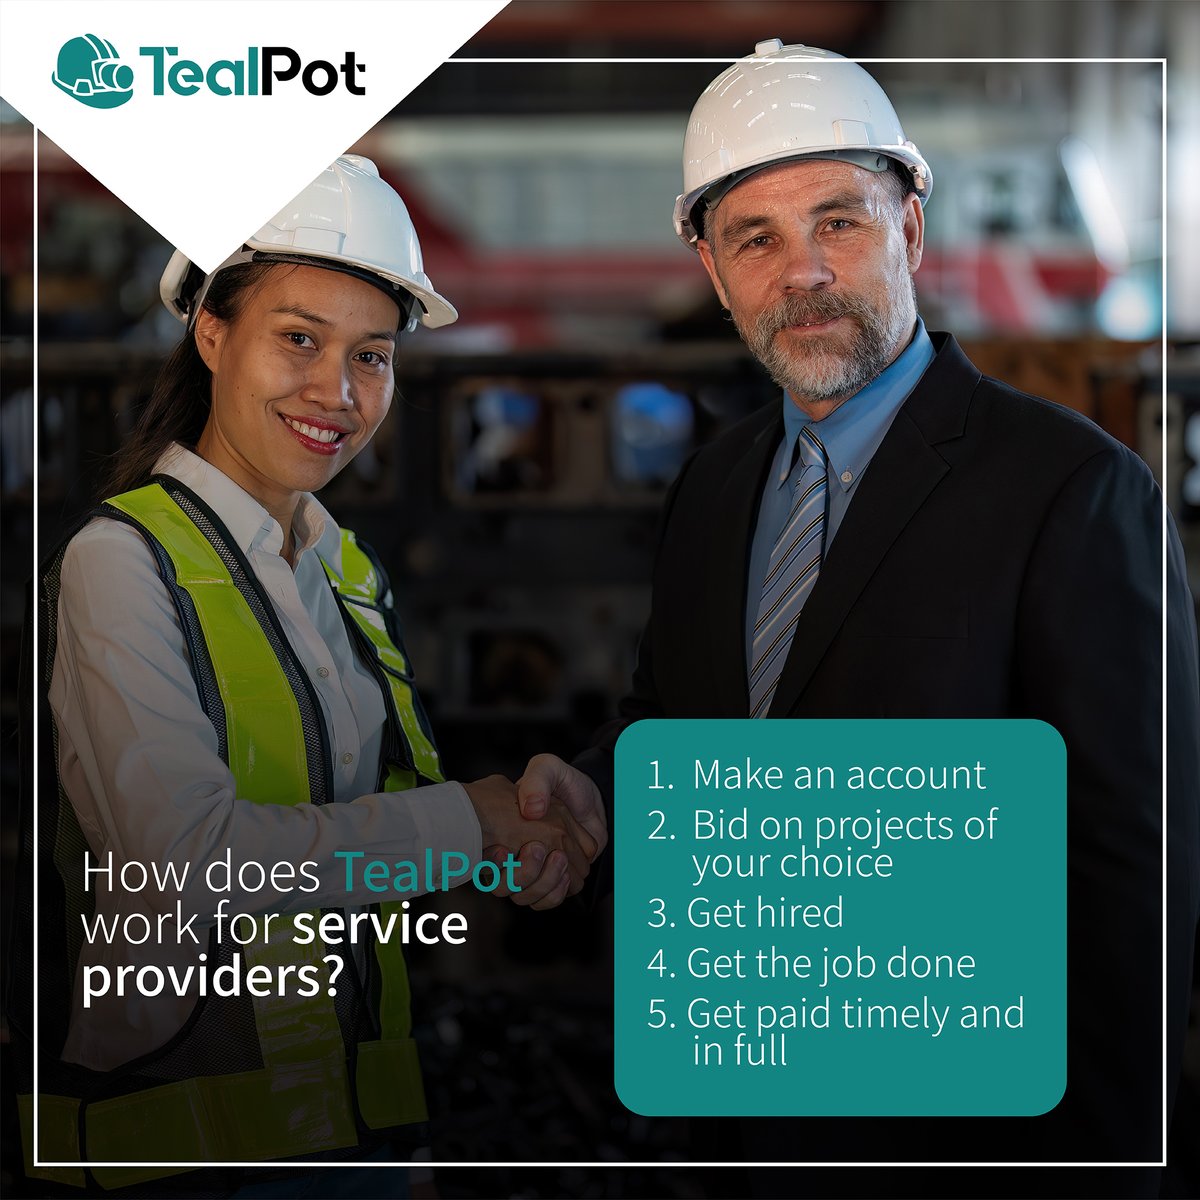 Need a skilled blue-collar professional? We've got you covered!
Connect with experienced experts quickly and easily. Your project is in good hands with TealPot.
#bluecollar #freelancing #bluecollarfreelancing #jobs #handyman #technicians #skilledjobs #skilledworkers #getready